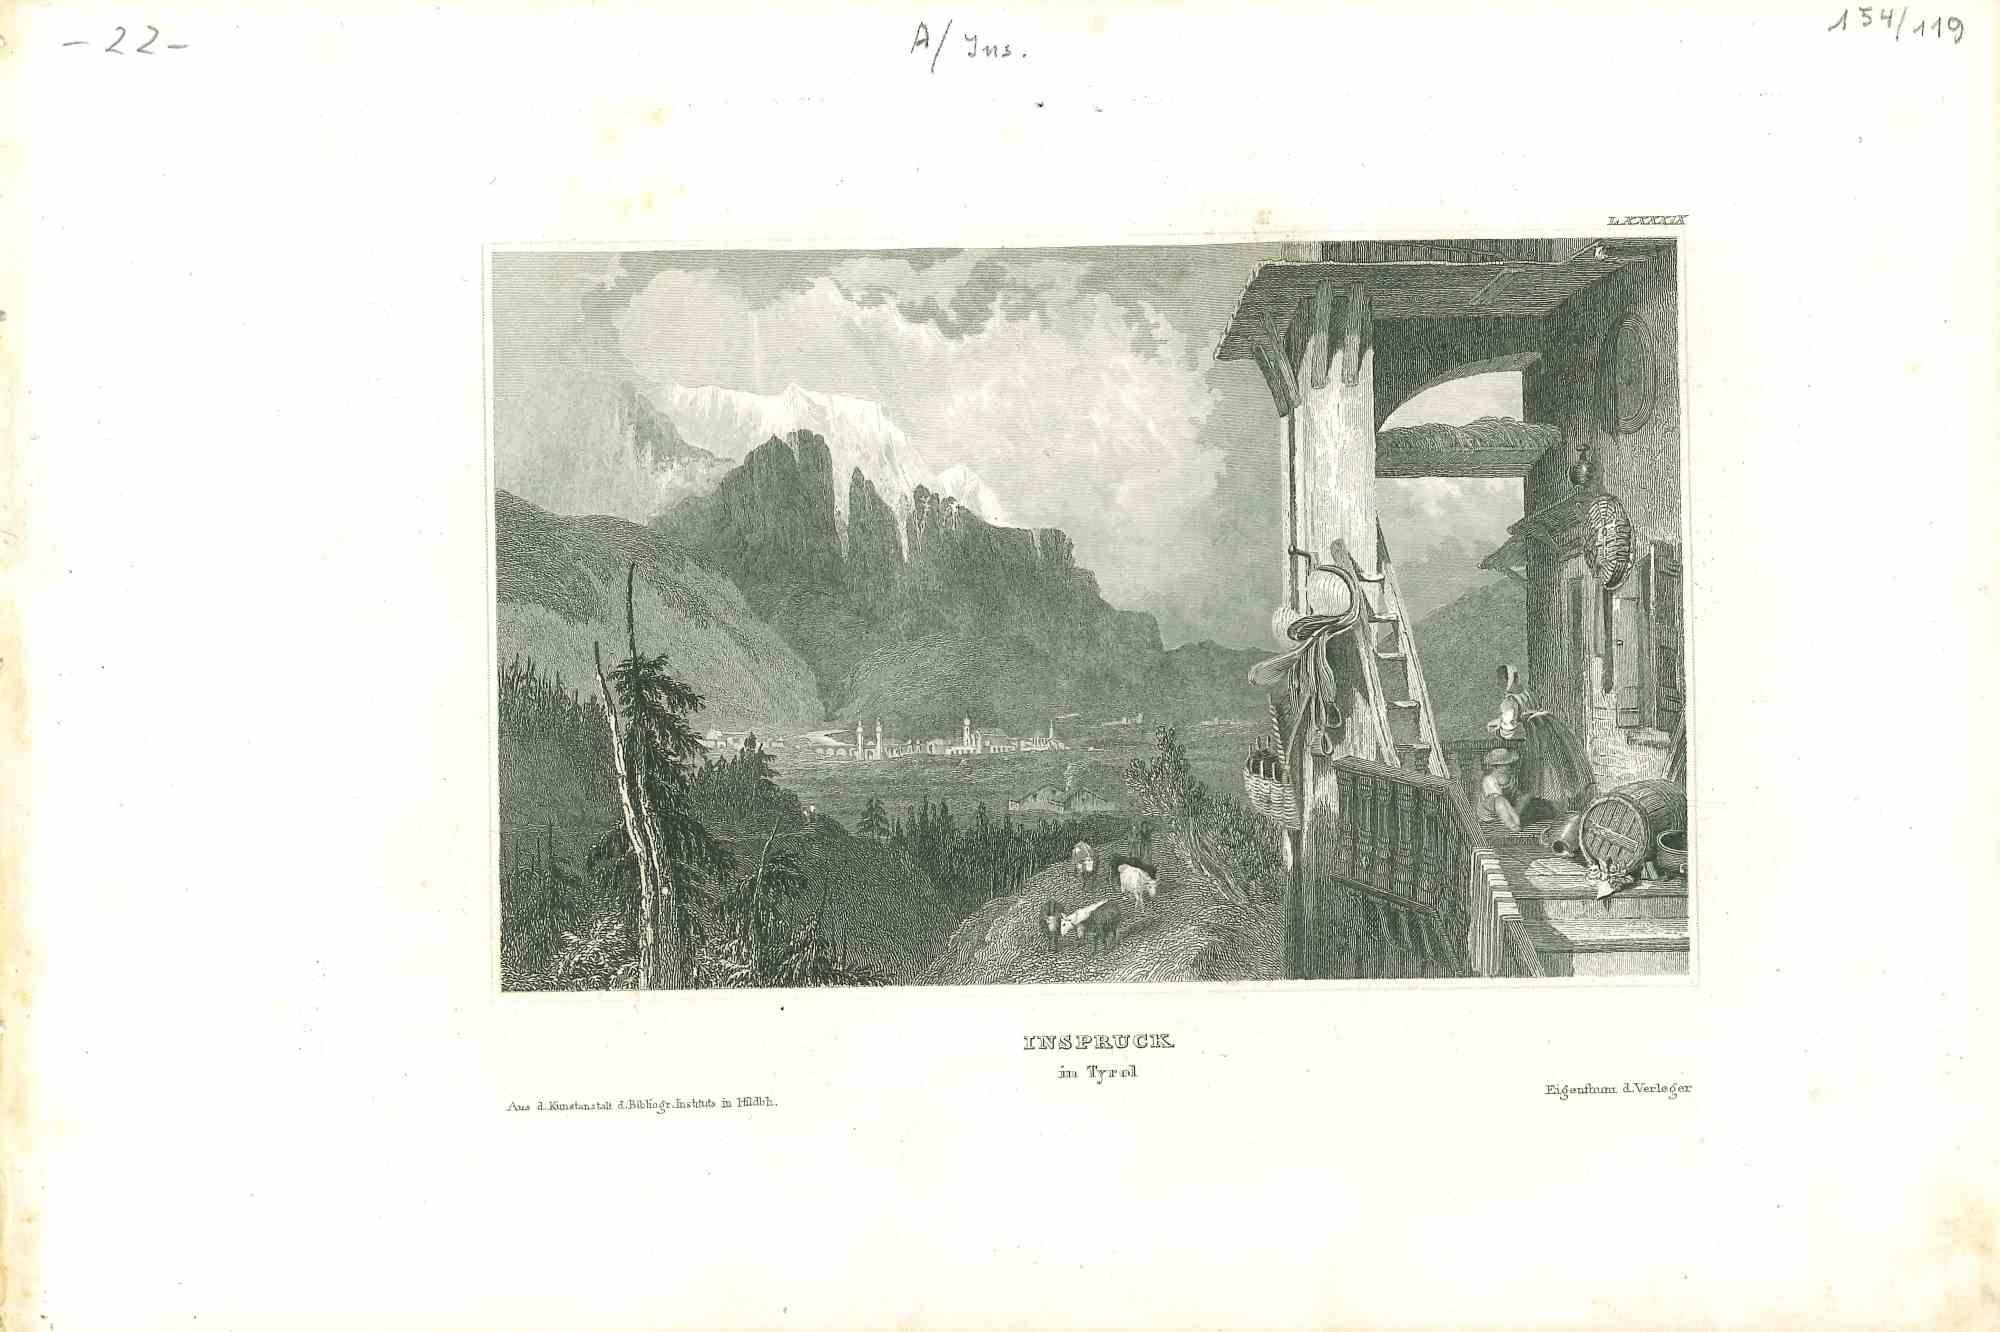 Unknown Figurative Print - Ancient View of Innsbruck - Original Lithograph on Paper - Mid-19th Century